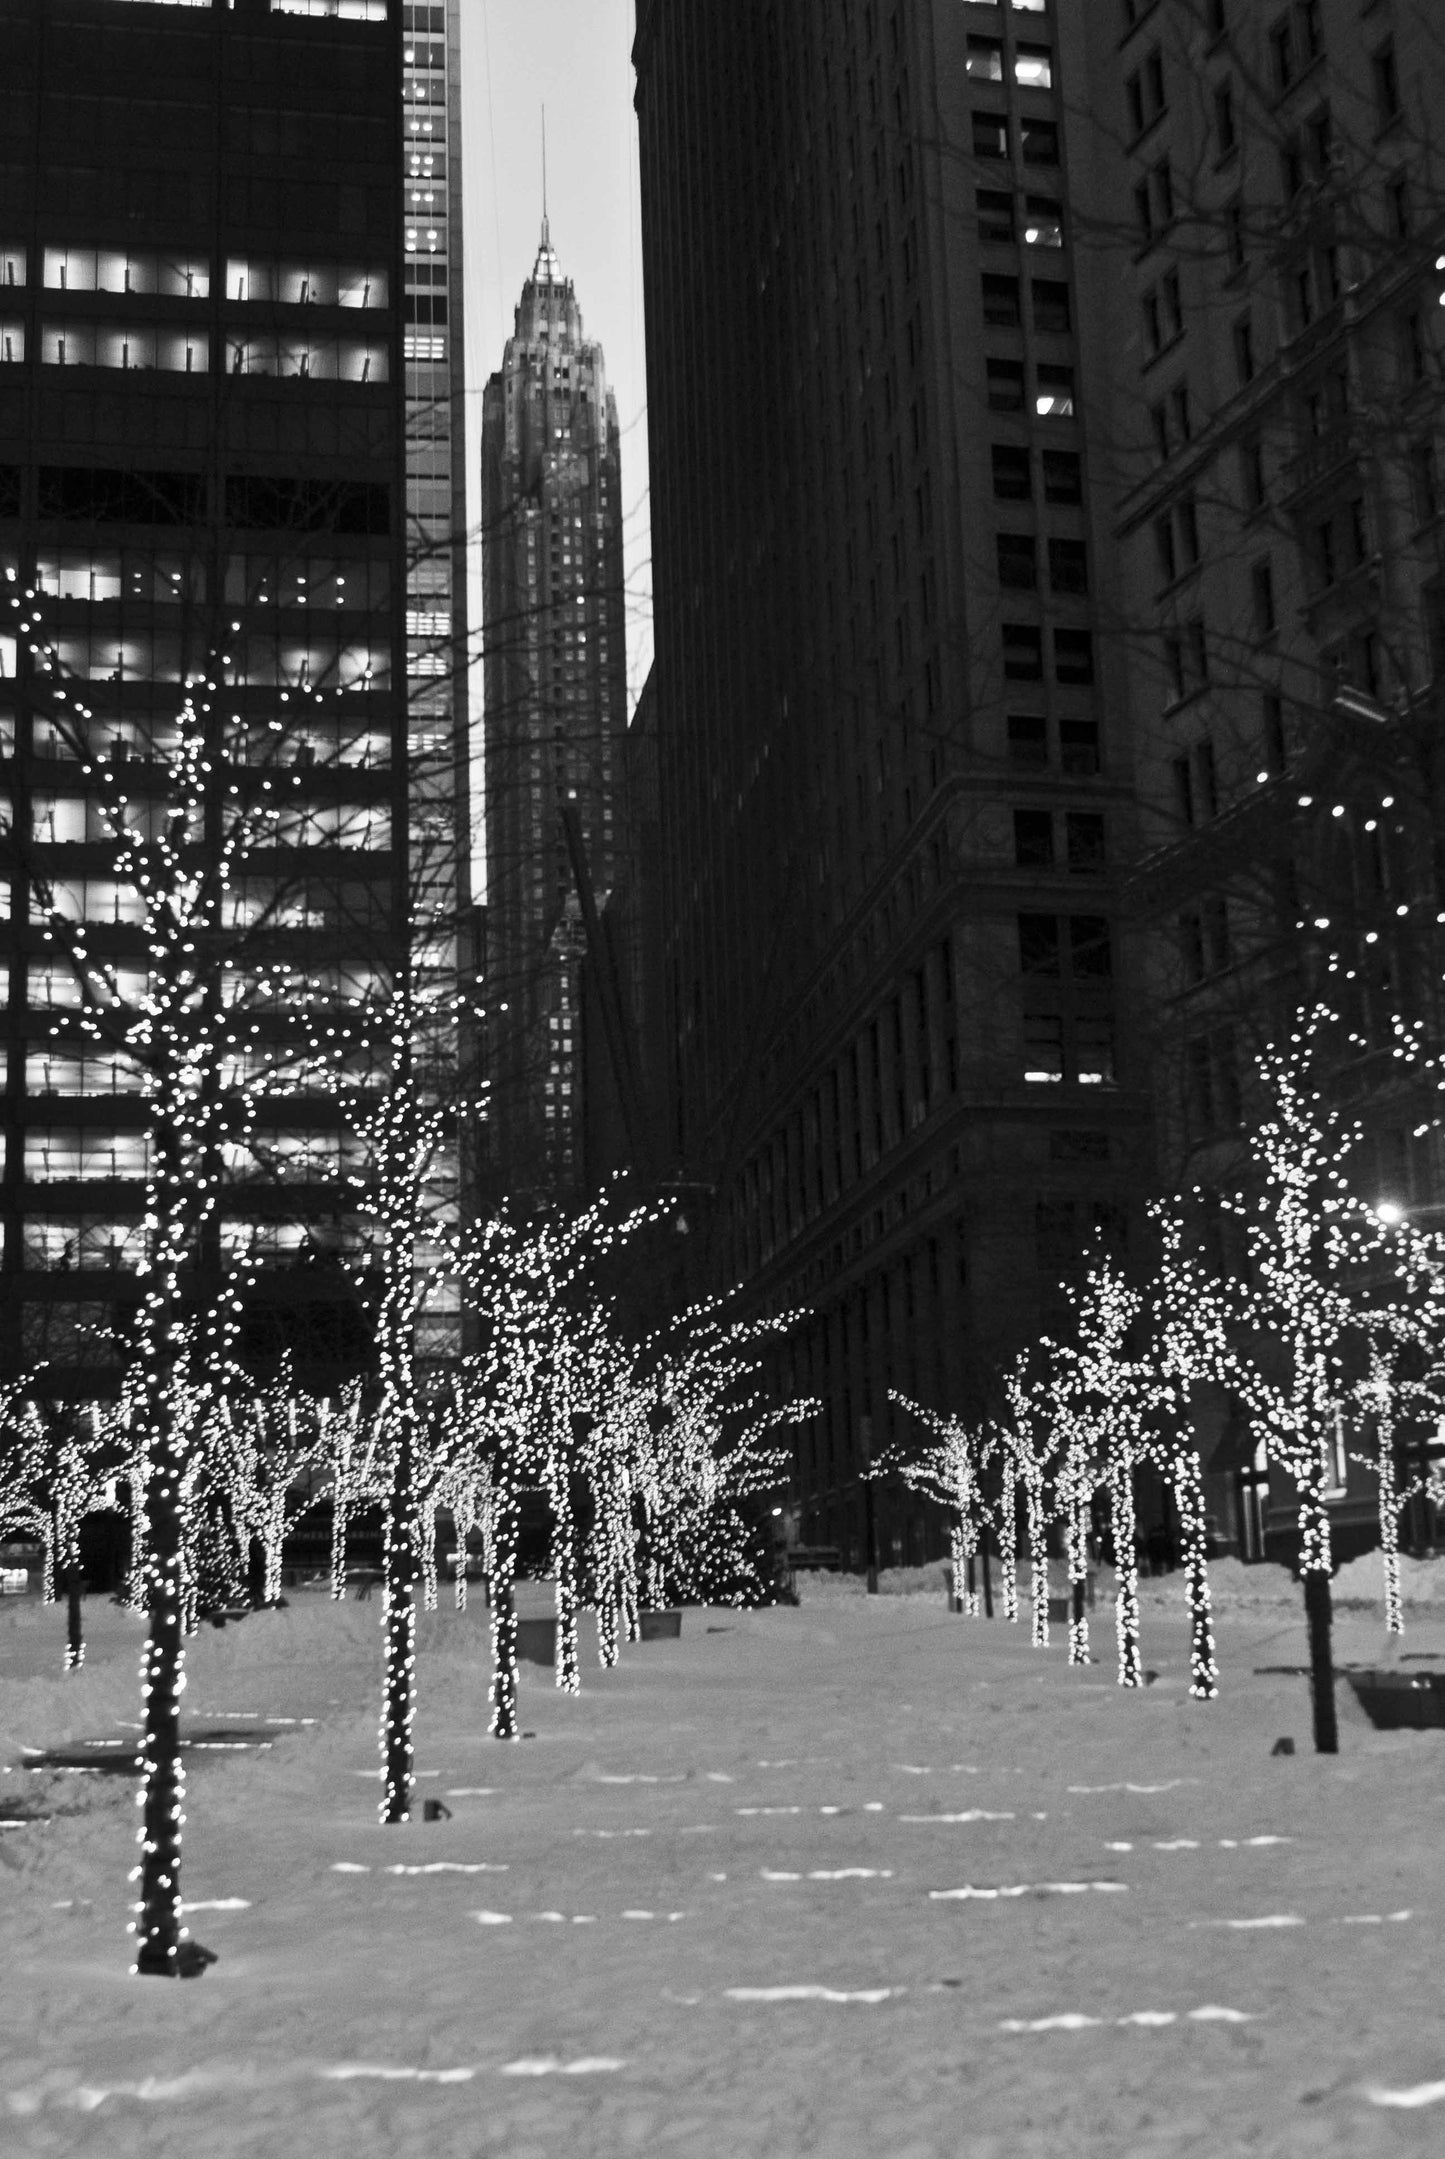 Alessandra Mattanza | LIGHTS, Financial District, New York. Decorations light the way in New Yorks financial district. Available as an art print or photographic print on acrylic glass.